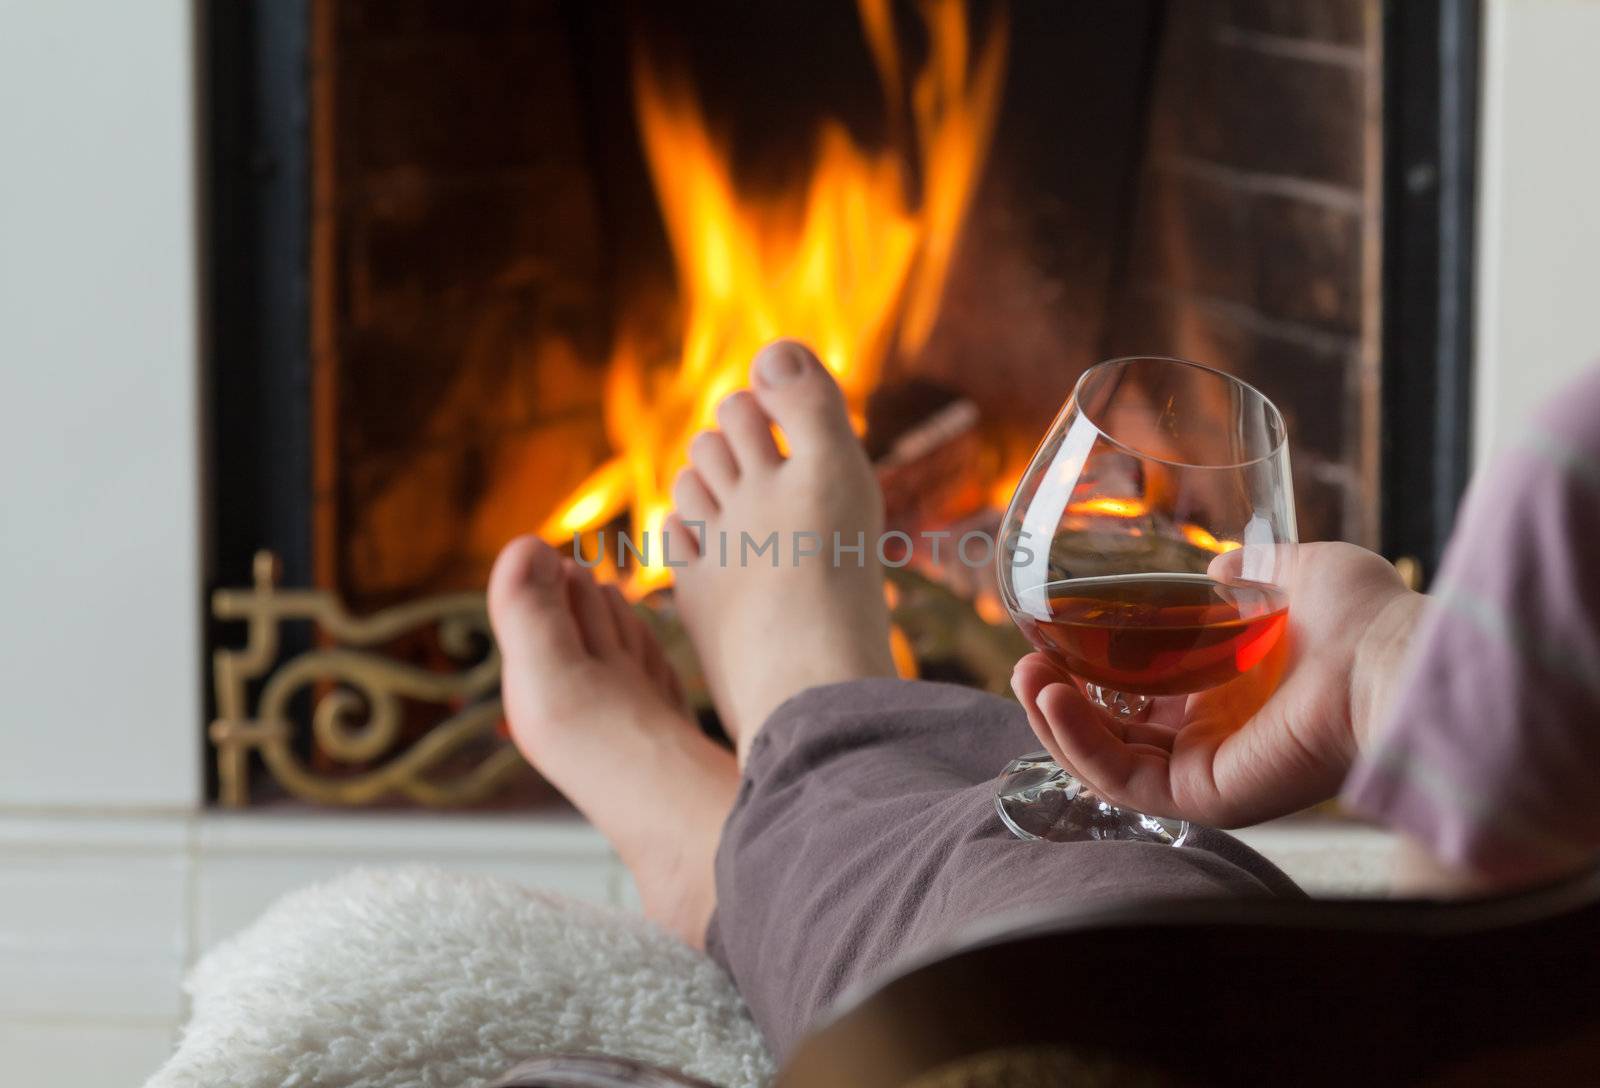 Resting at the burning fireplace fire with a glass of cognac by Antartis